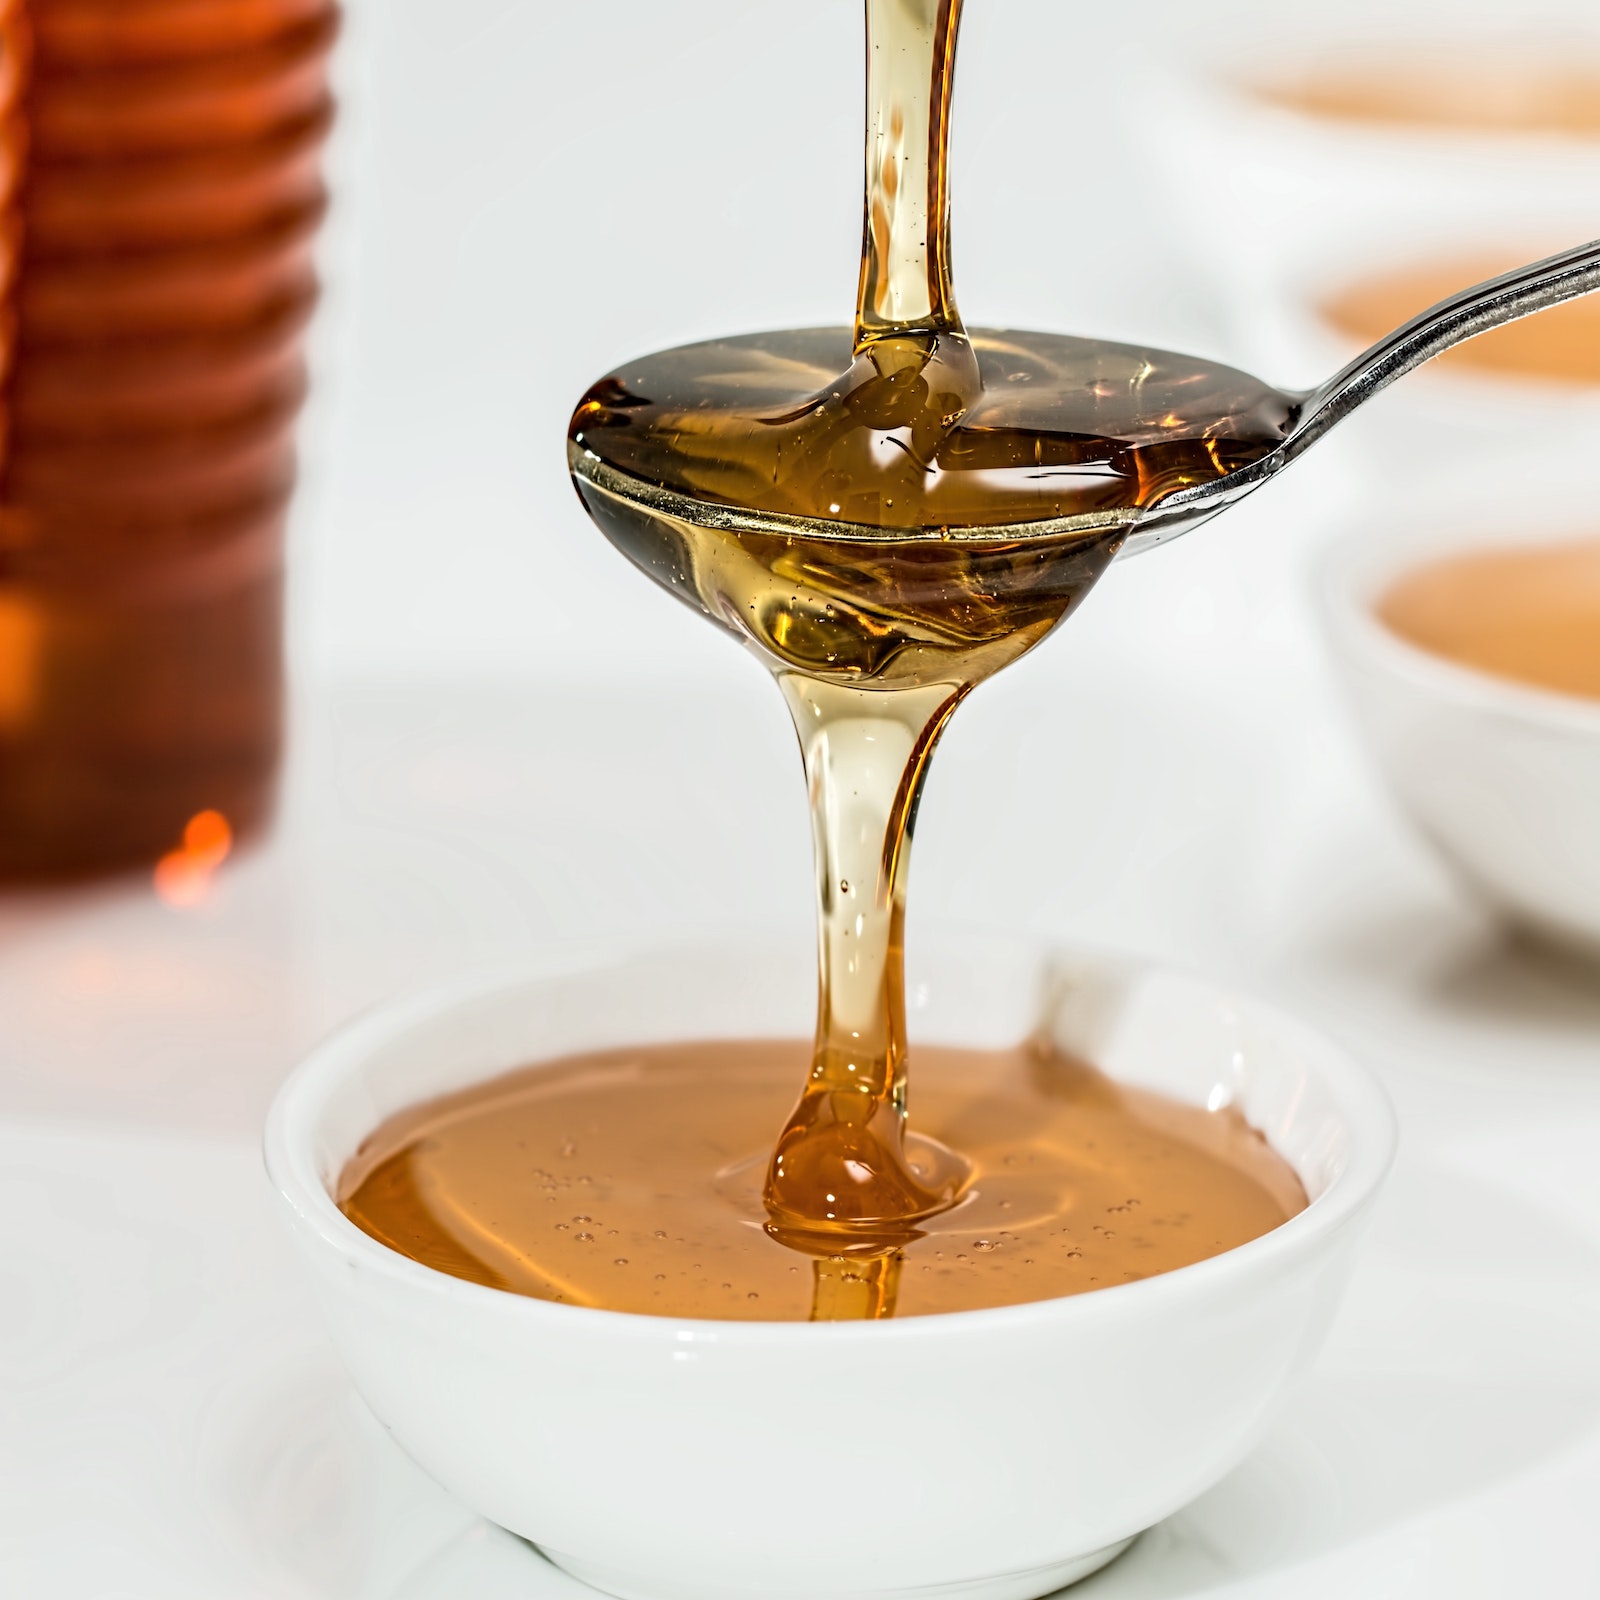 honey dripping onto a spoon